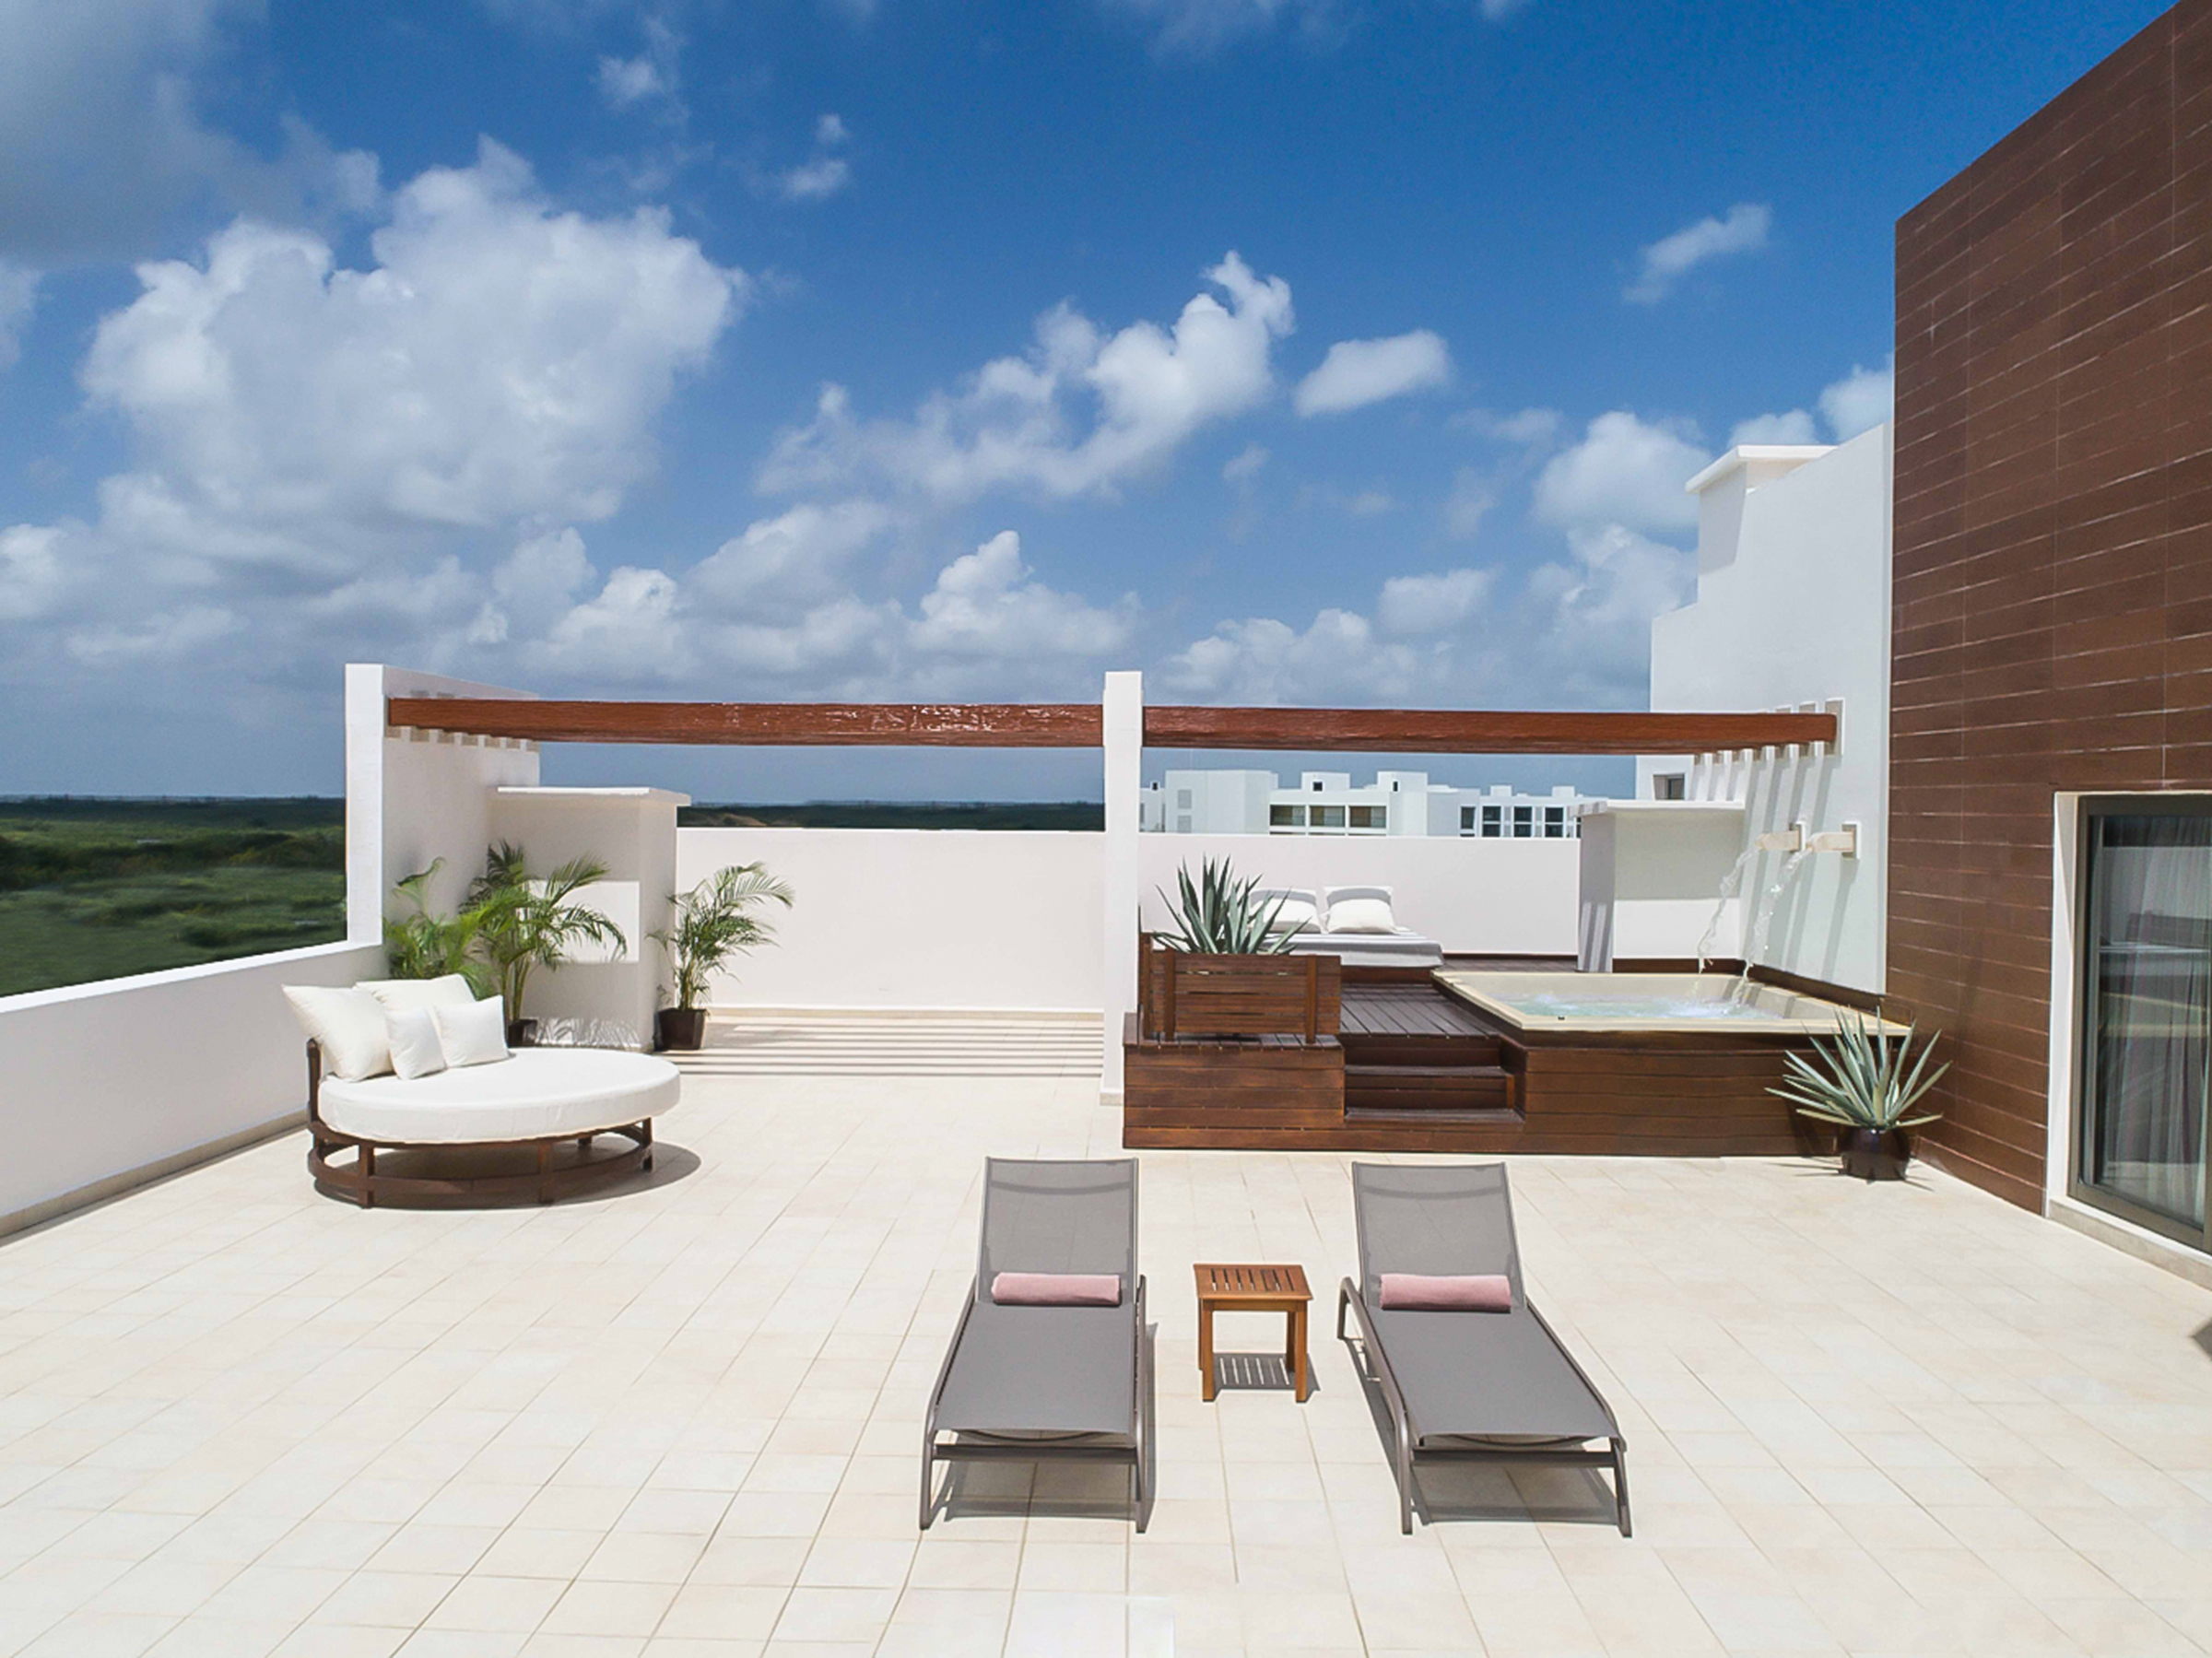 Rooftop terrace suite option in the luxury resort of Excellence Playa Mujeres